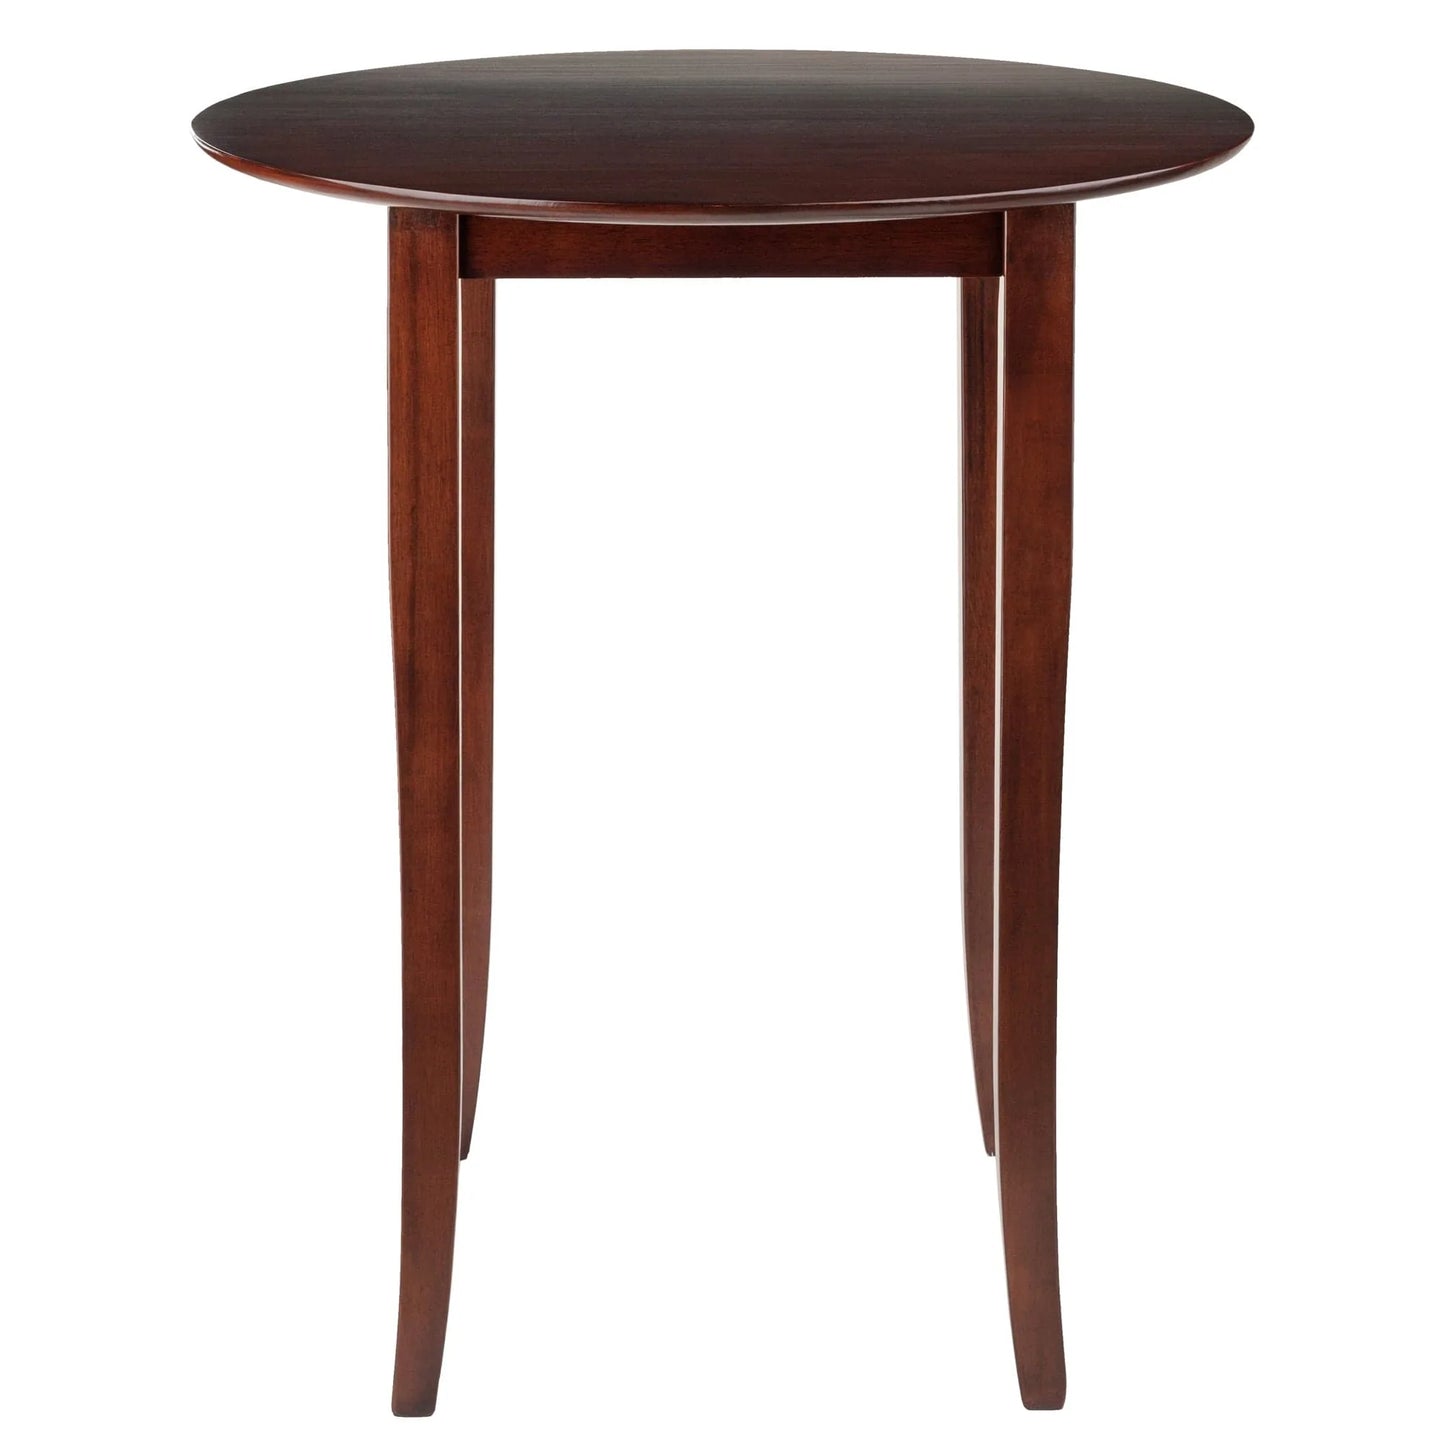 WINSOME Pub Table Set Fiona Round High Table, Walnut